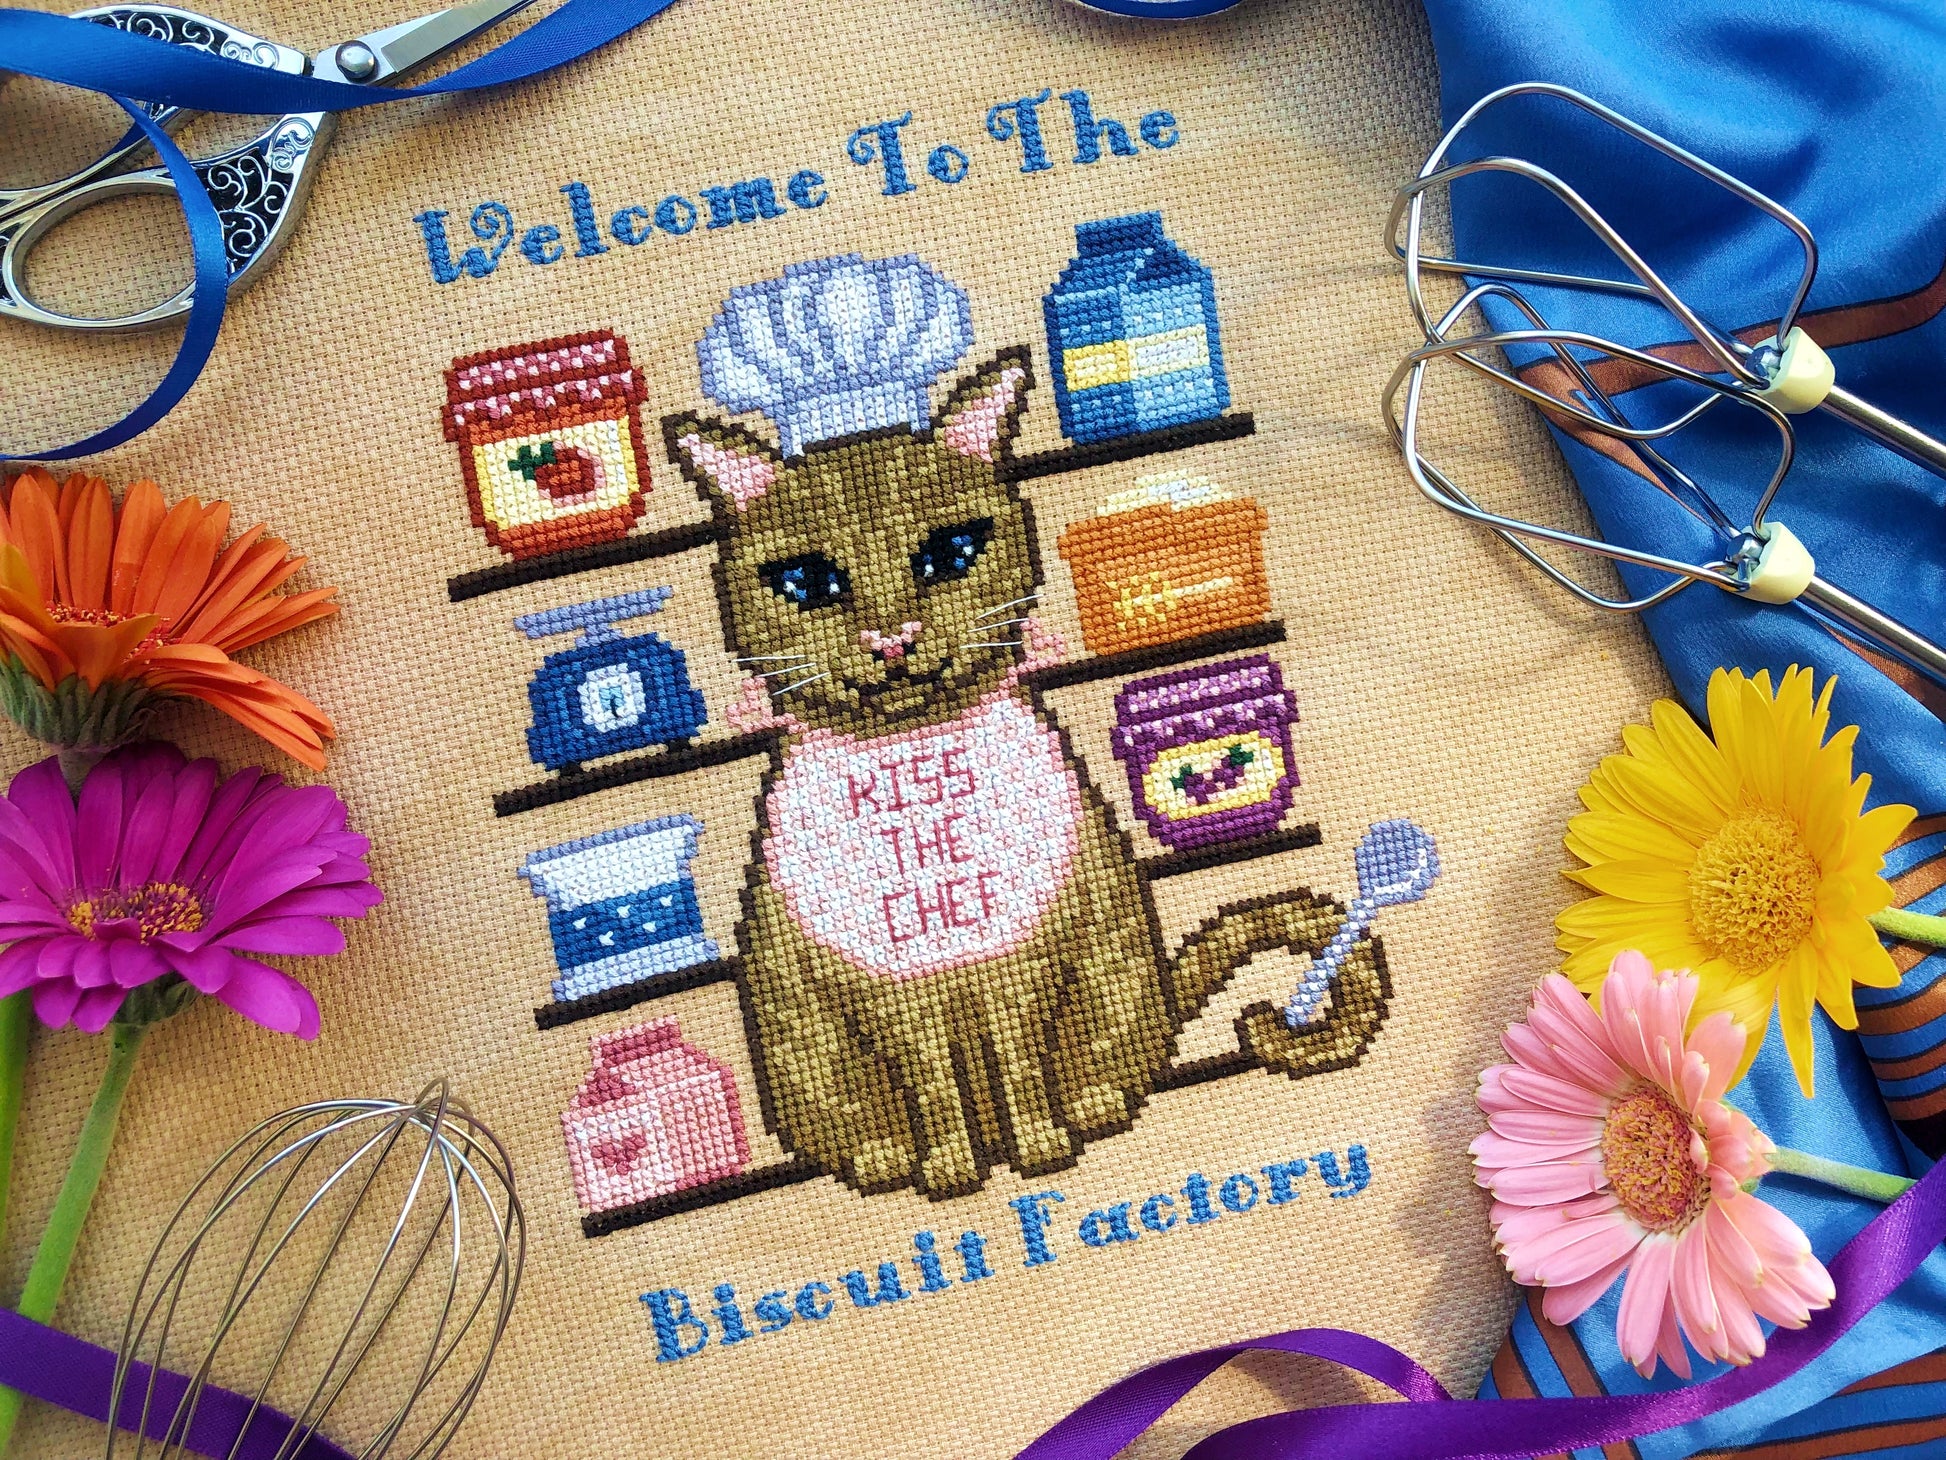 Front view of cat baker. Composition consists of a tabby cat, surrounded by baking supplies such as jams, milks, sugar and wheat. The cat is holding a spoon with his tail. The text positioned above and below reads "Welcome to the Biscuit Factory".